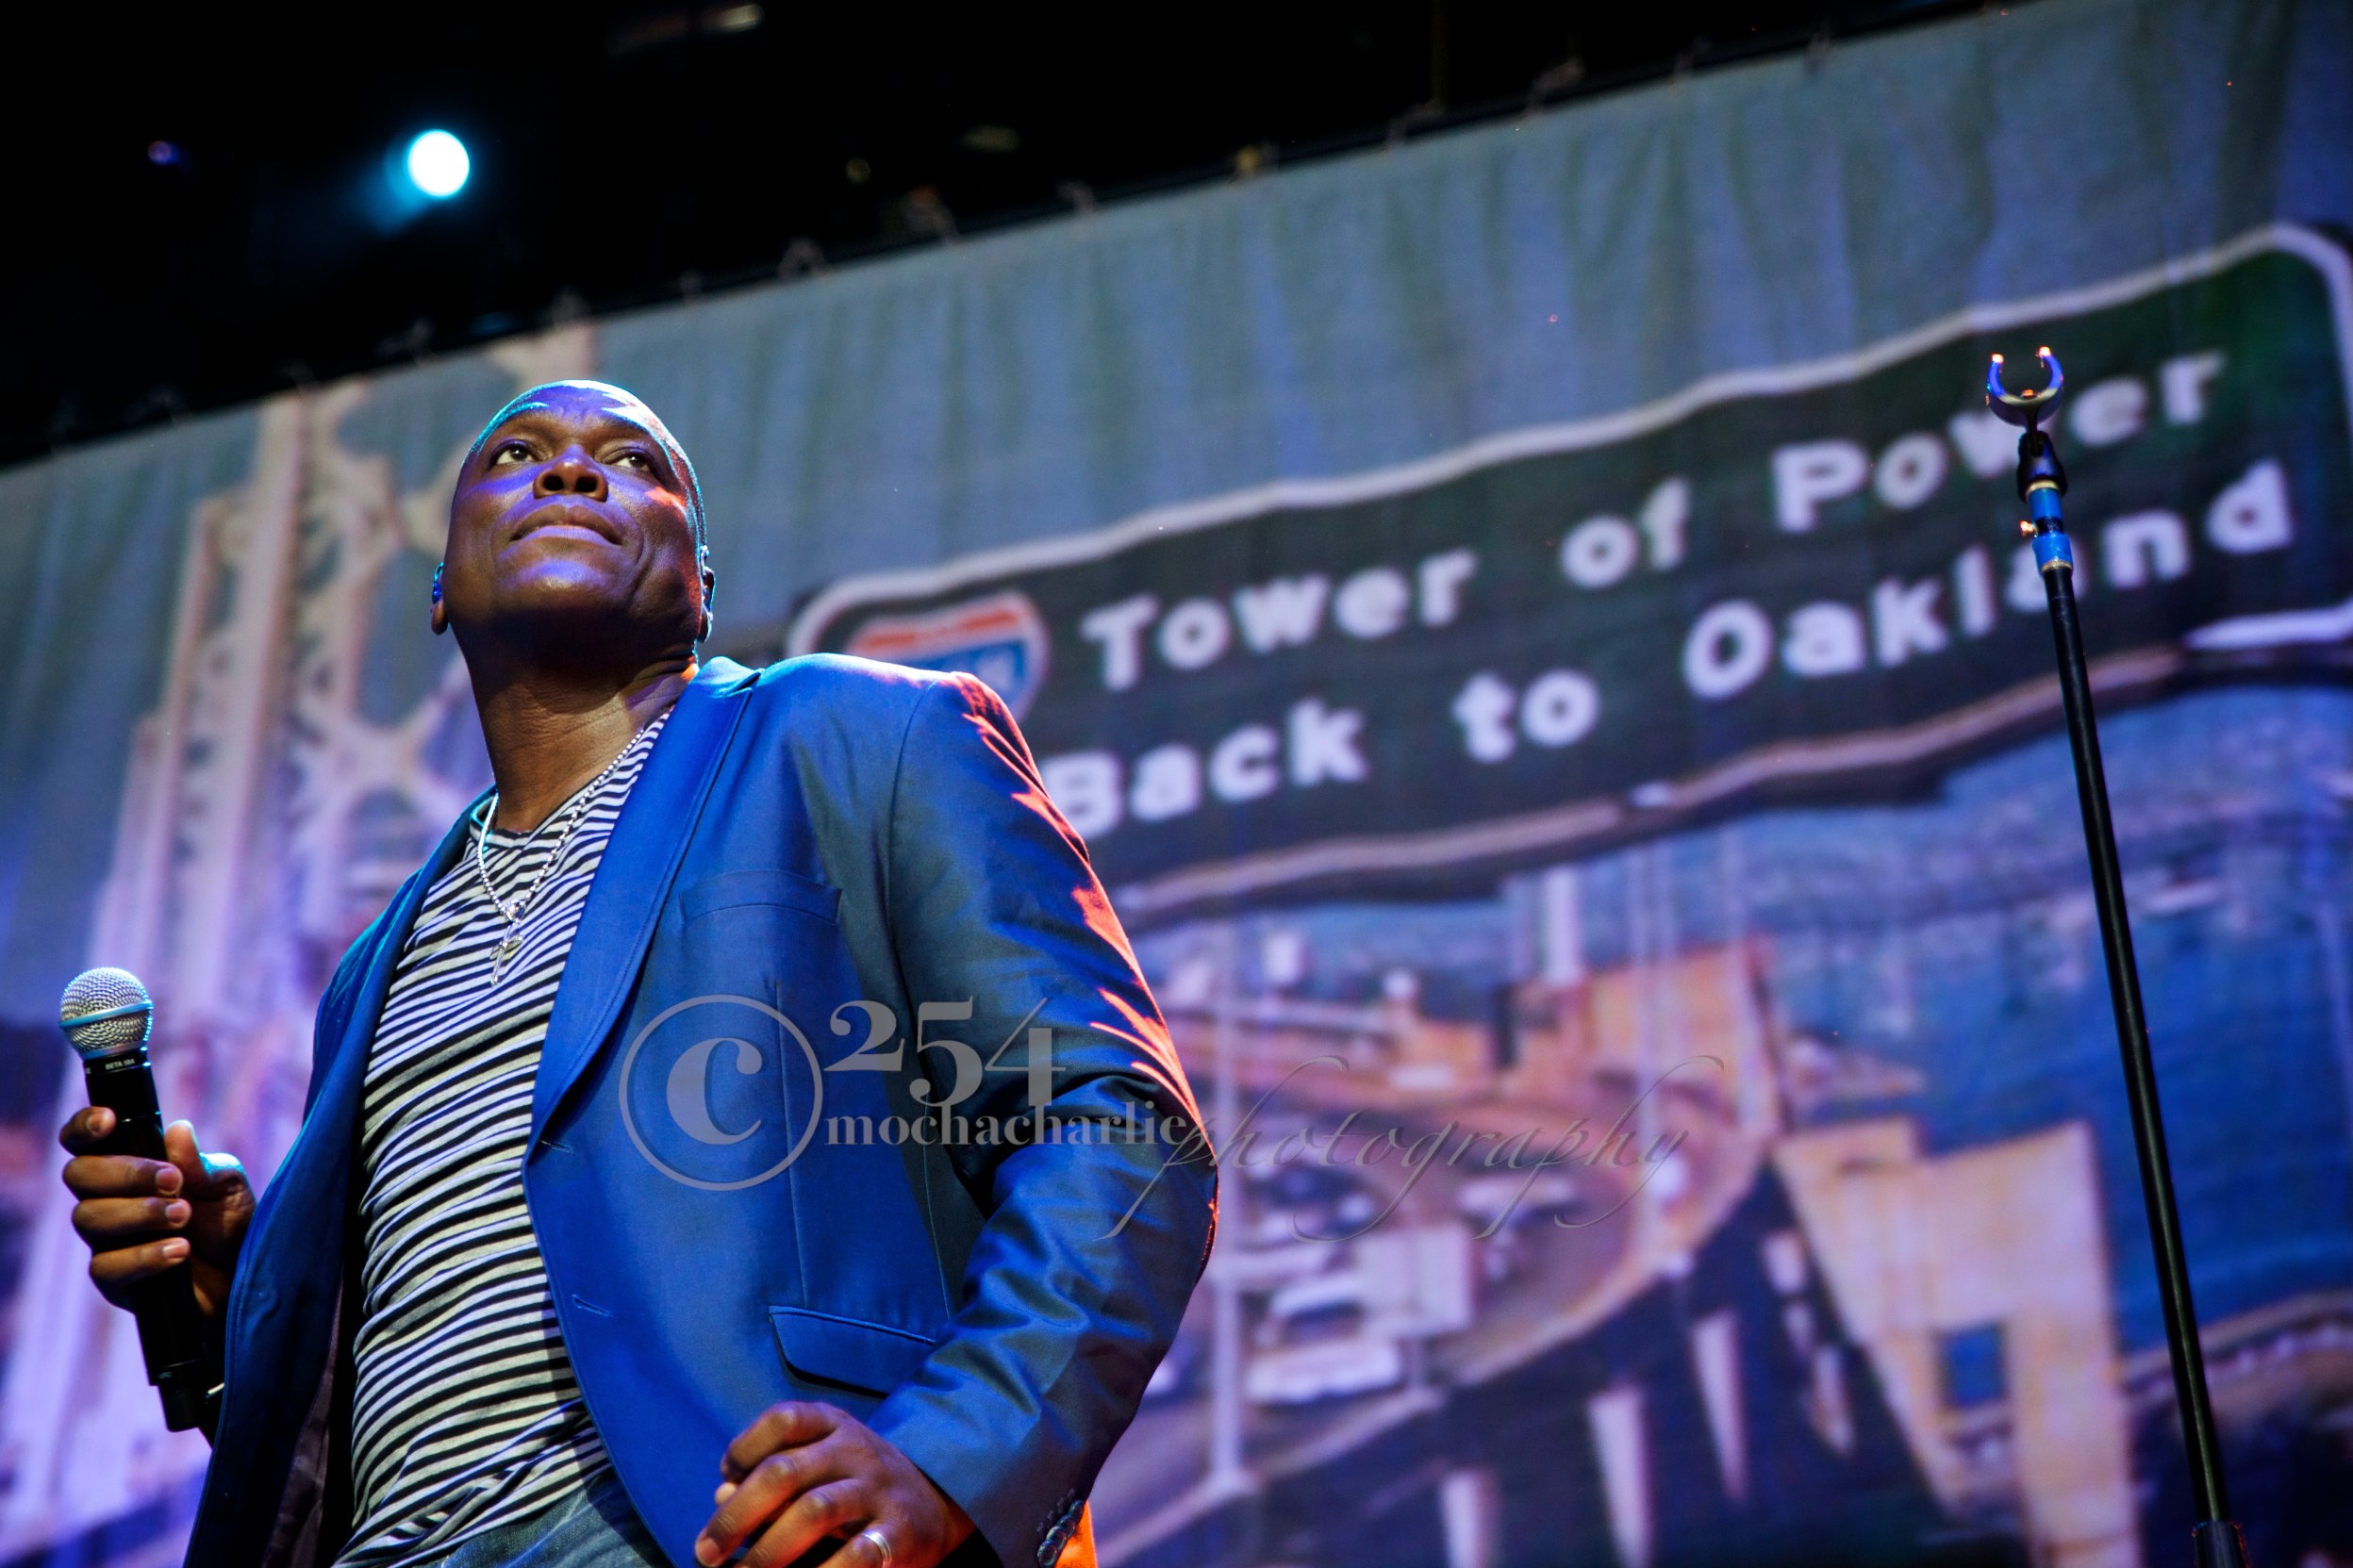 Tower of Power at White River Ampitheater (Photo by Mocha Charlie)